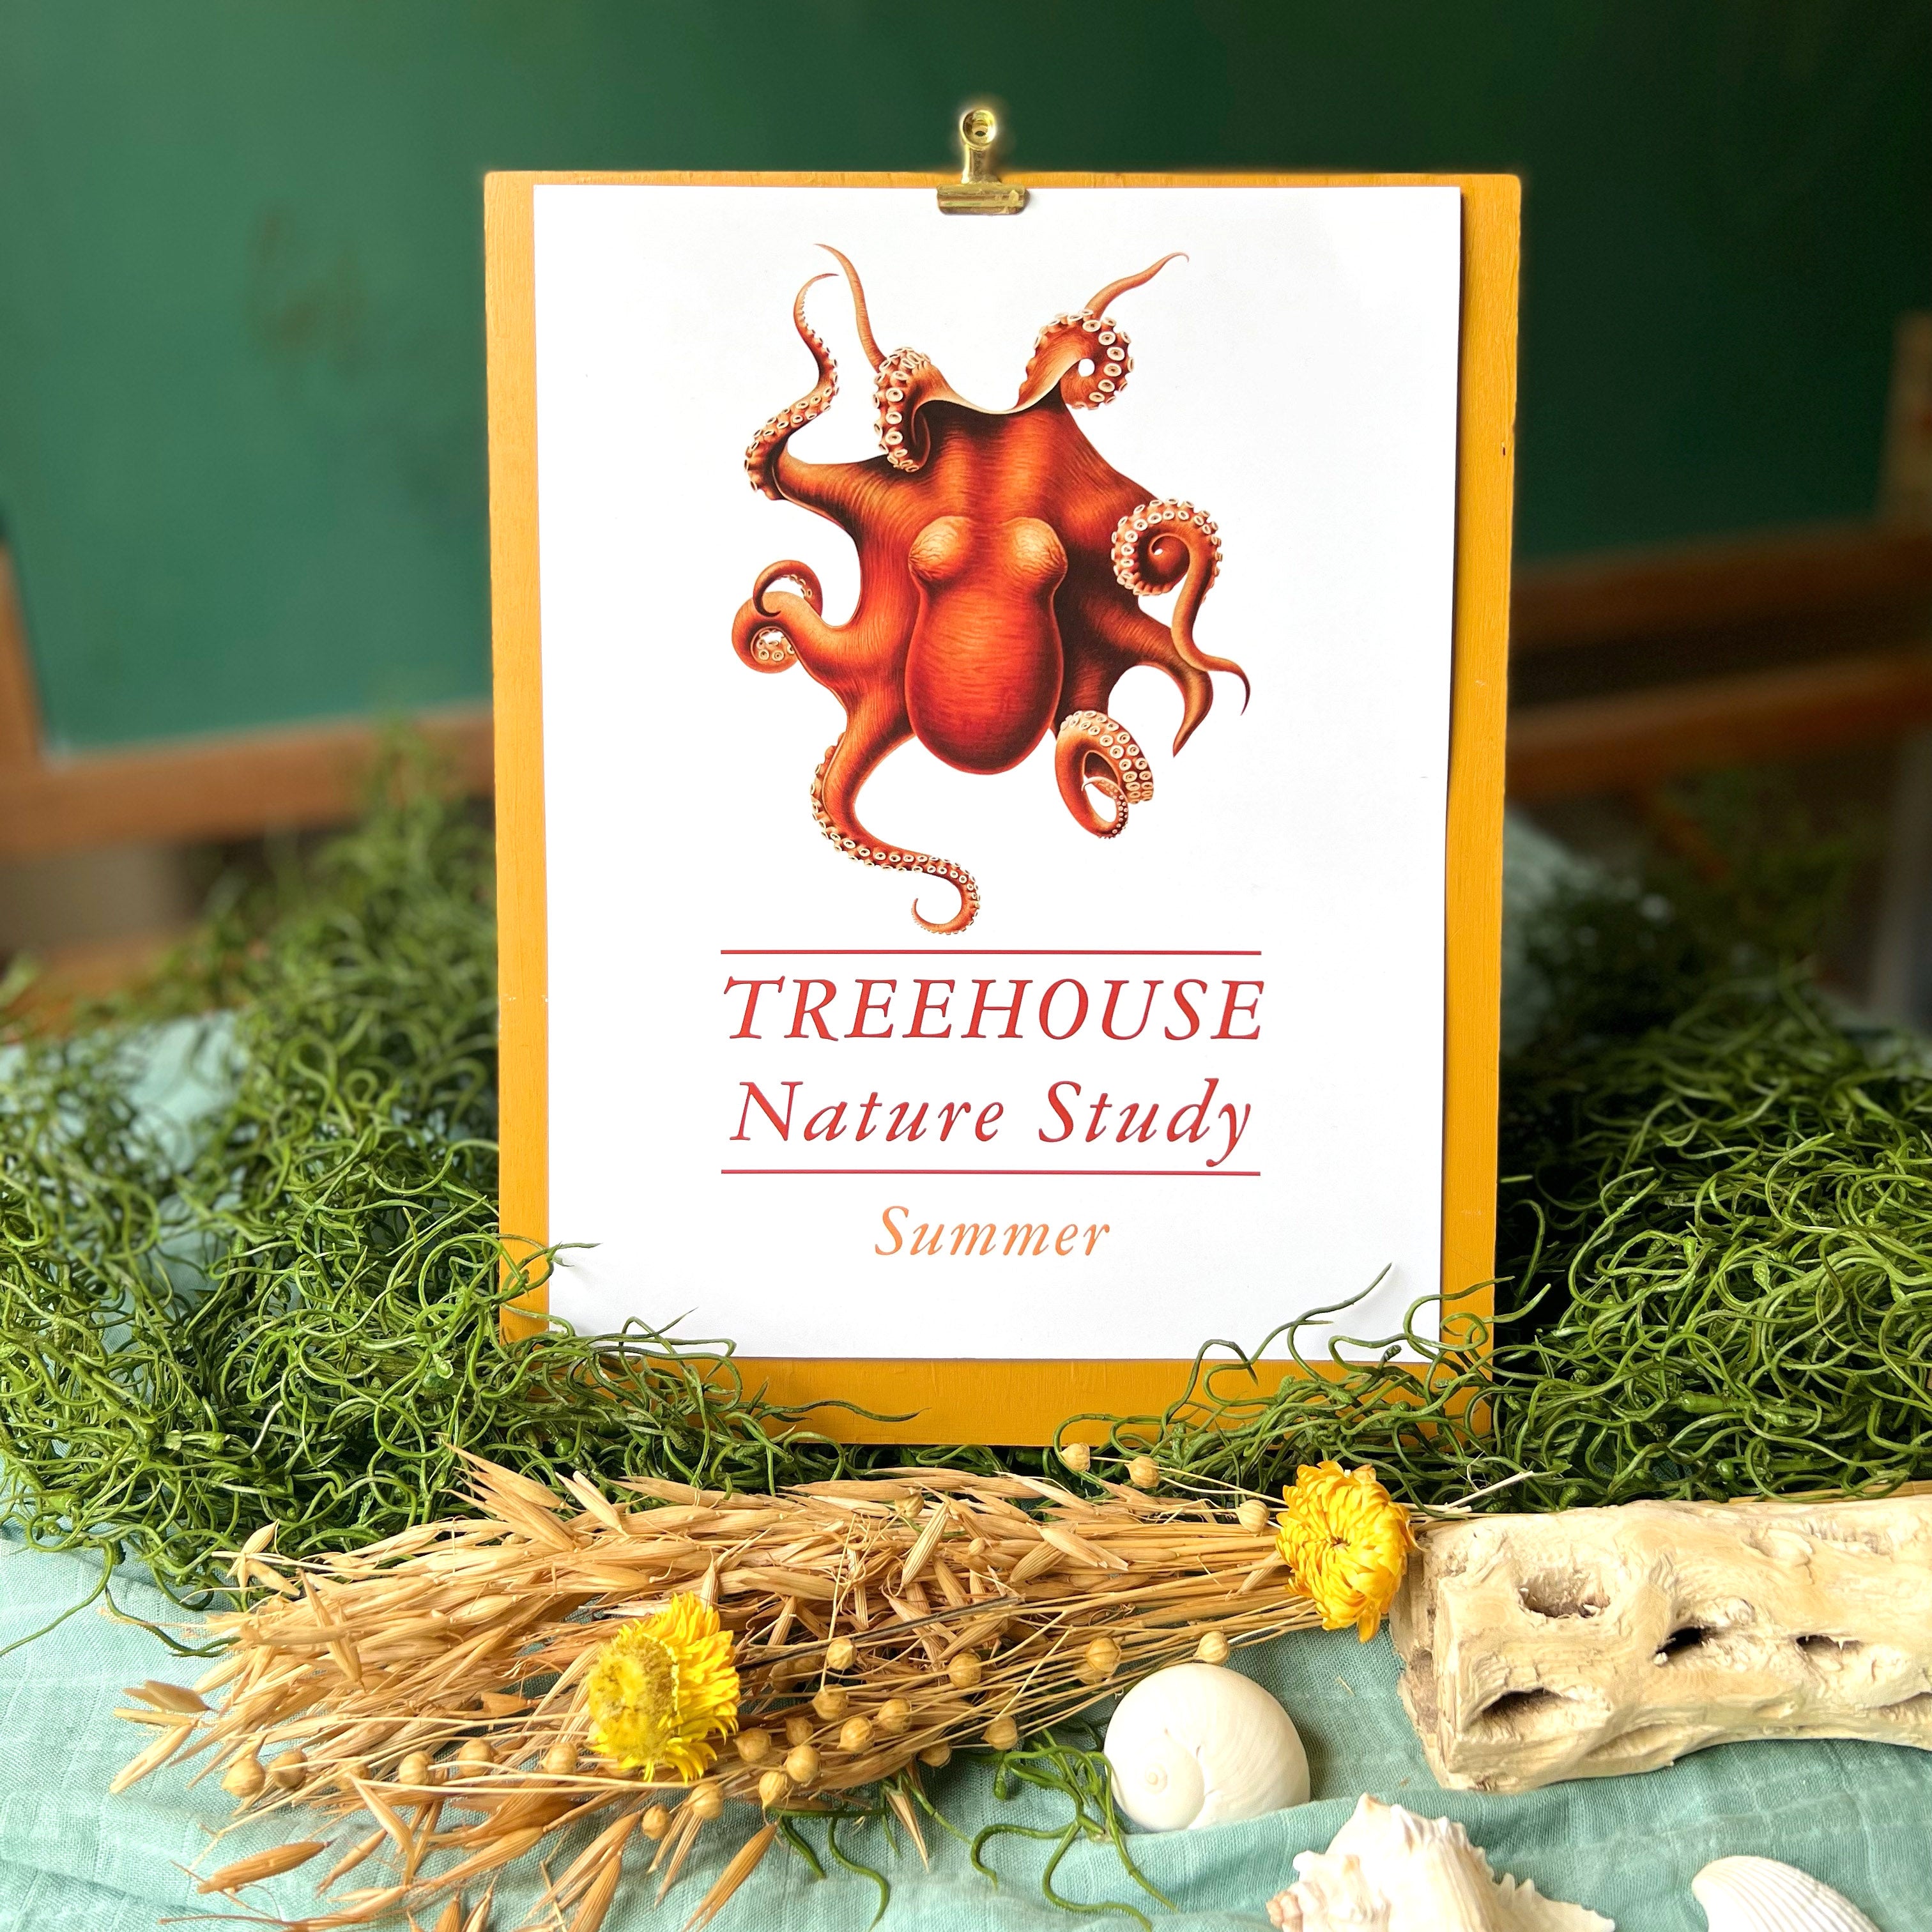 Treehouse Nature Study: Summer